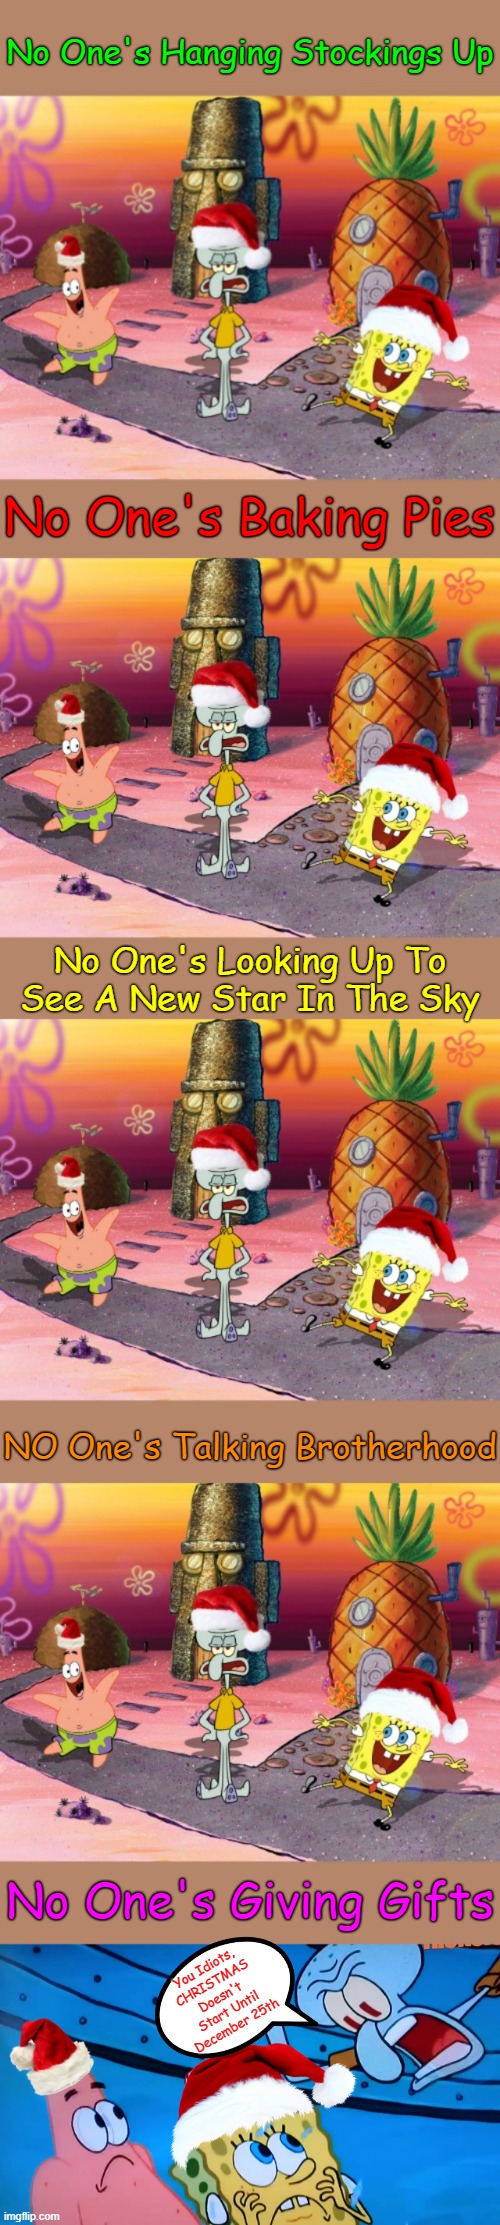 "'Tis The Season To Be Squidward" Spongebob Christmas Weekend Dec 11-13 a Kraziness_all_the_way, EGOS & MeMe_BOMB1 event | No One's Hanging Stockings Up; No One's Baking Pies; No One's Looking Up To See A New Star In The Sky; NO One's Talking Brotherhood; No One's Giving Gifts; You Idiots, CHRISTMAS Doesn't Start Until December 25th | image tagged in memes,spongebob christmas weekend,egos,kraziness_all_the_way,meme_bomb1,squidward | made w/ Imgflip meme maker